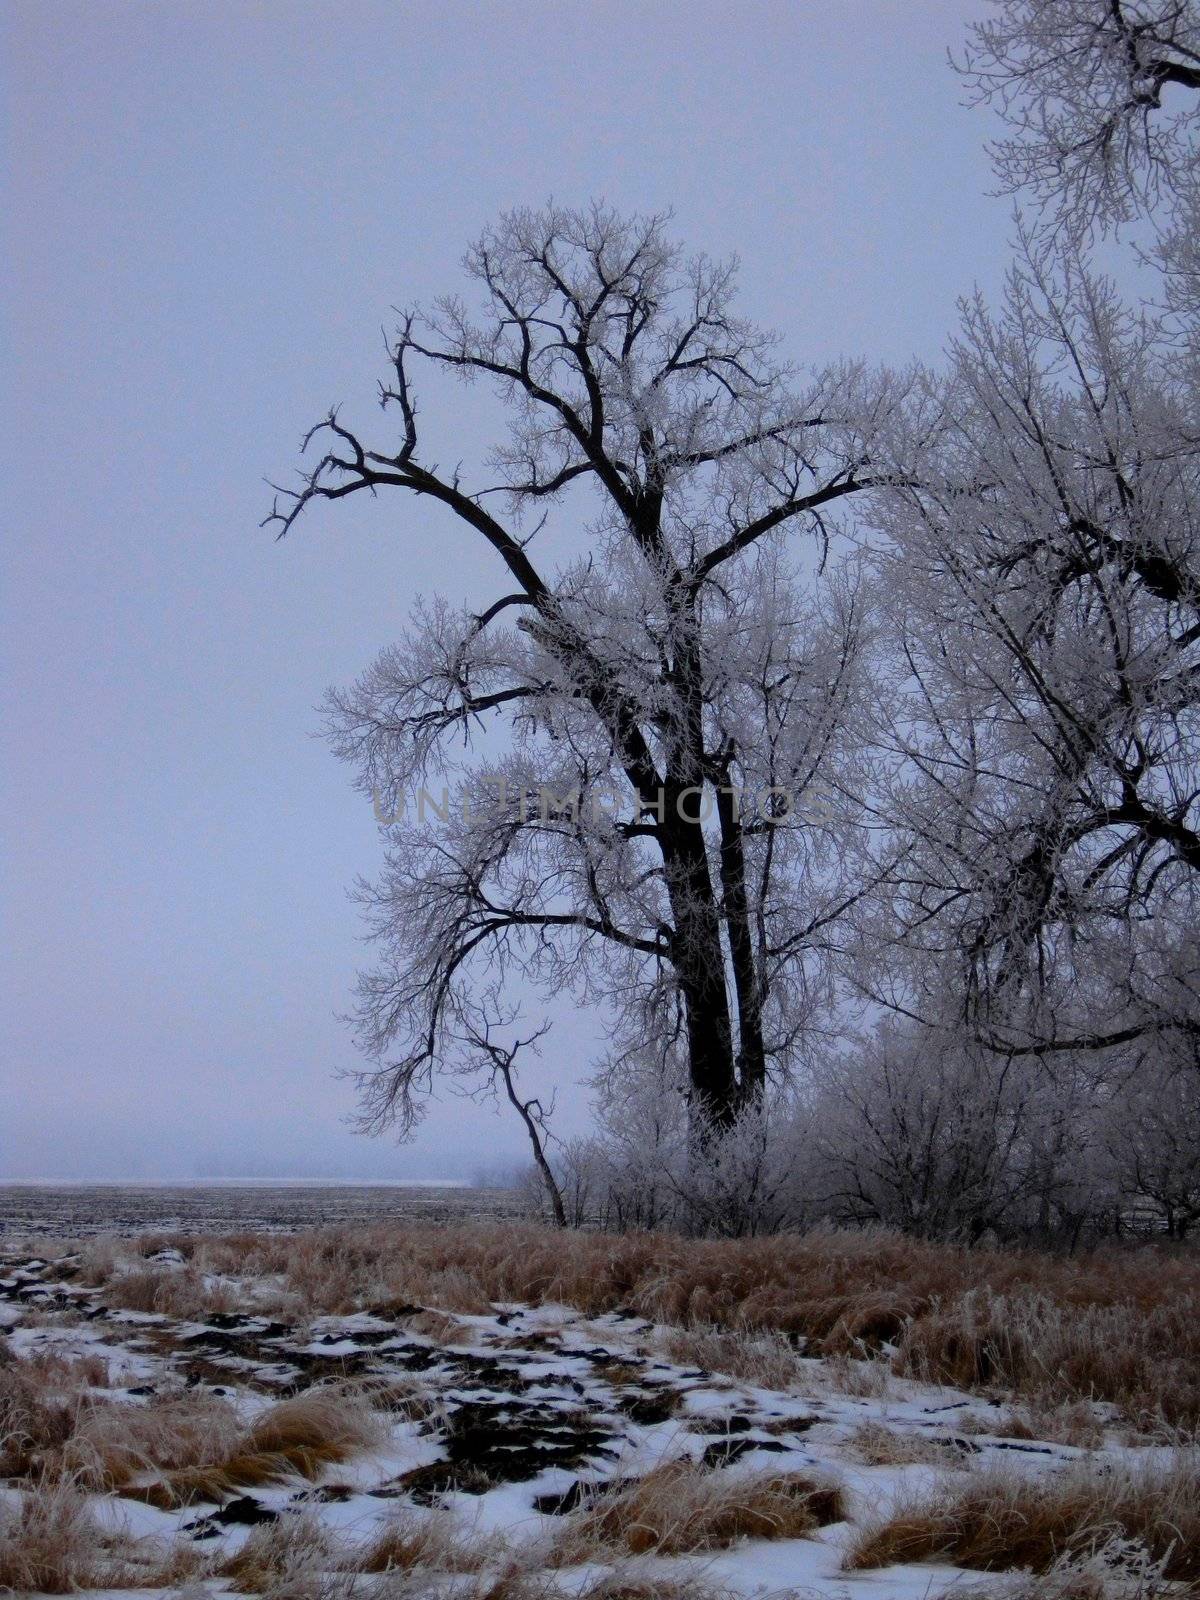 Icy Trees 2 by BrianneLeeHoffman